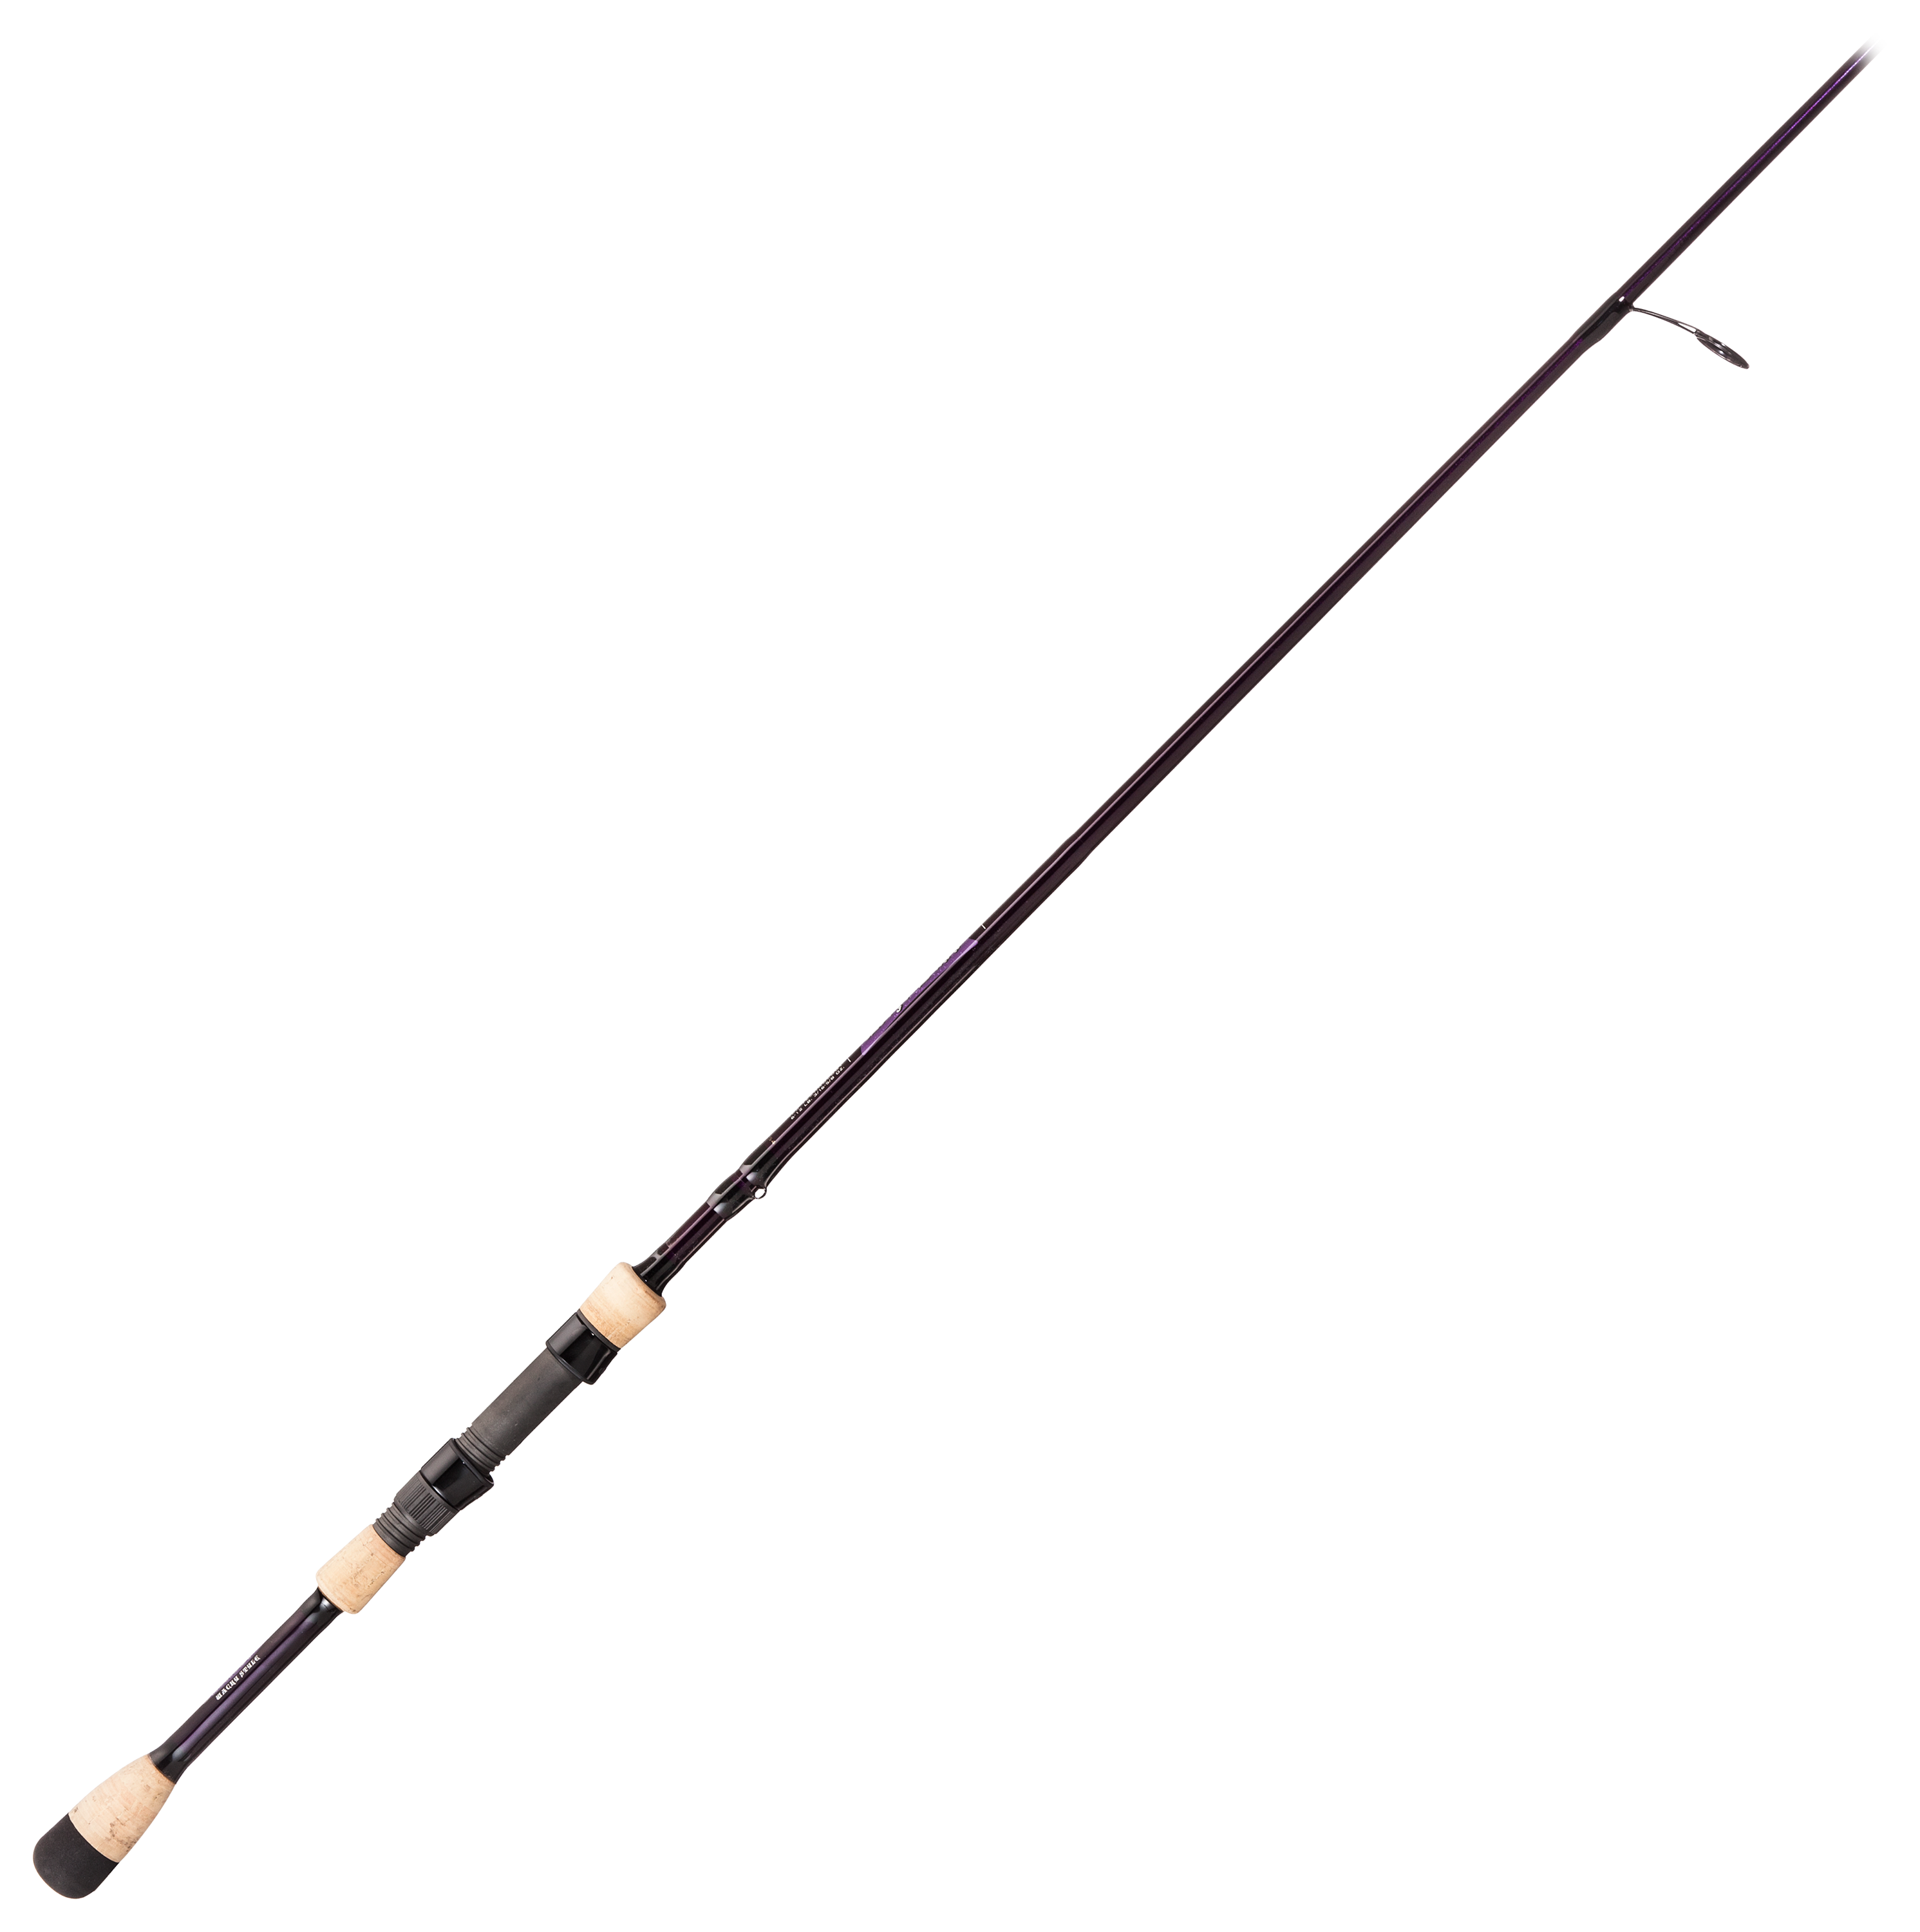 St. Croix Trout Series Spinning Rod Bass Pro Shops